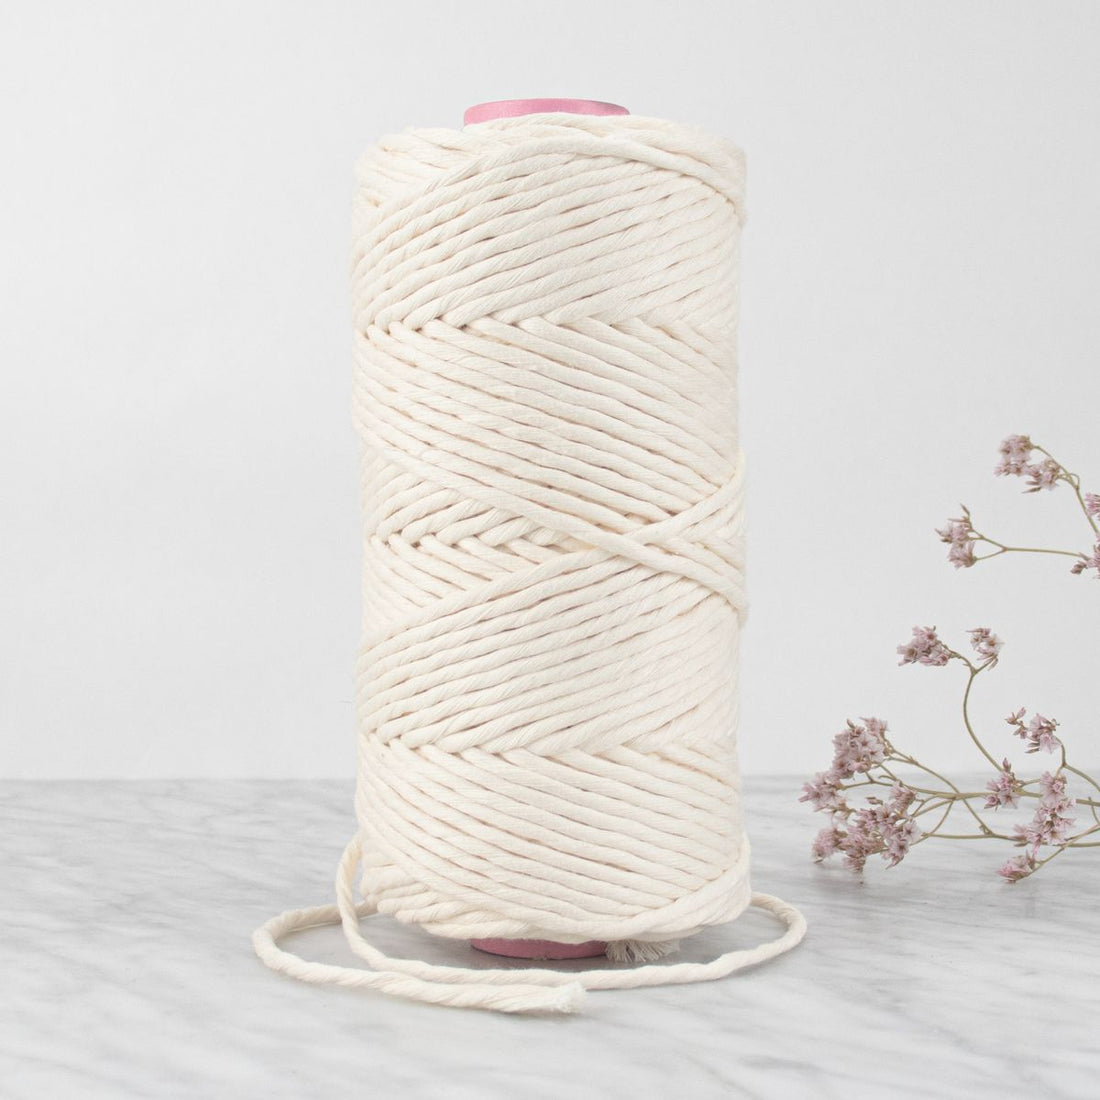 Egyptian Cotton String - 5mm - 500 grams - Ivory